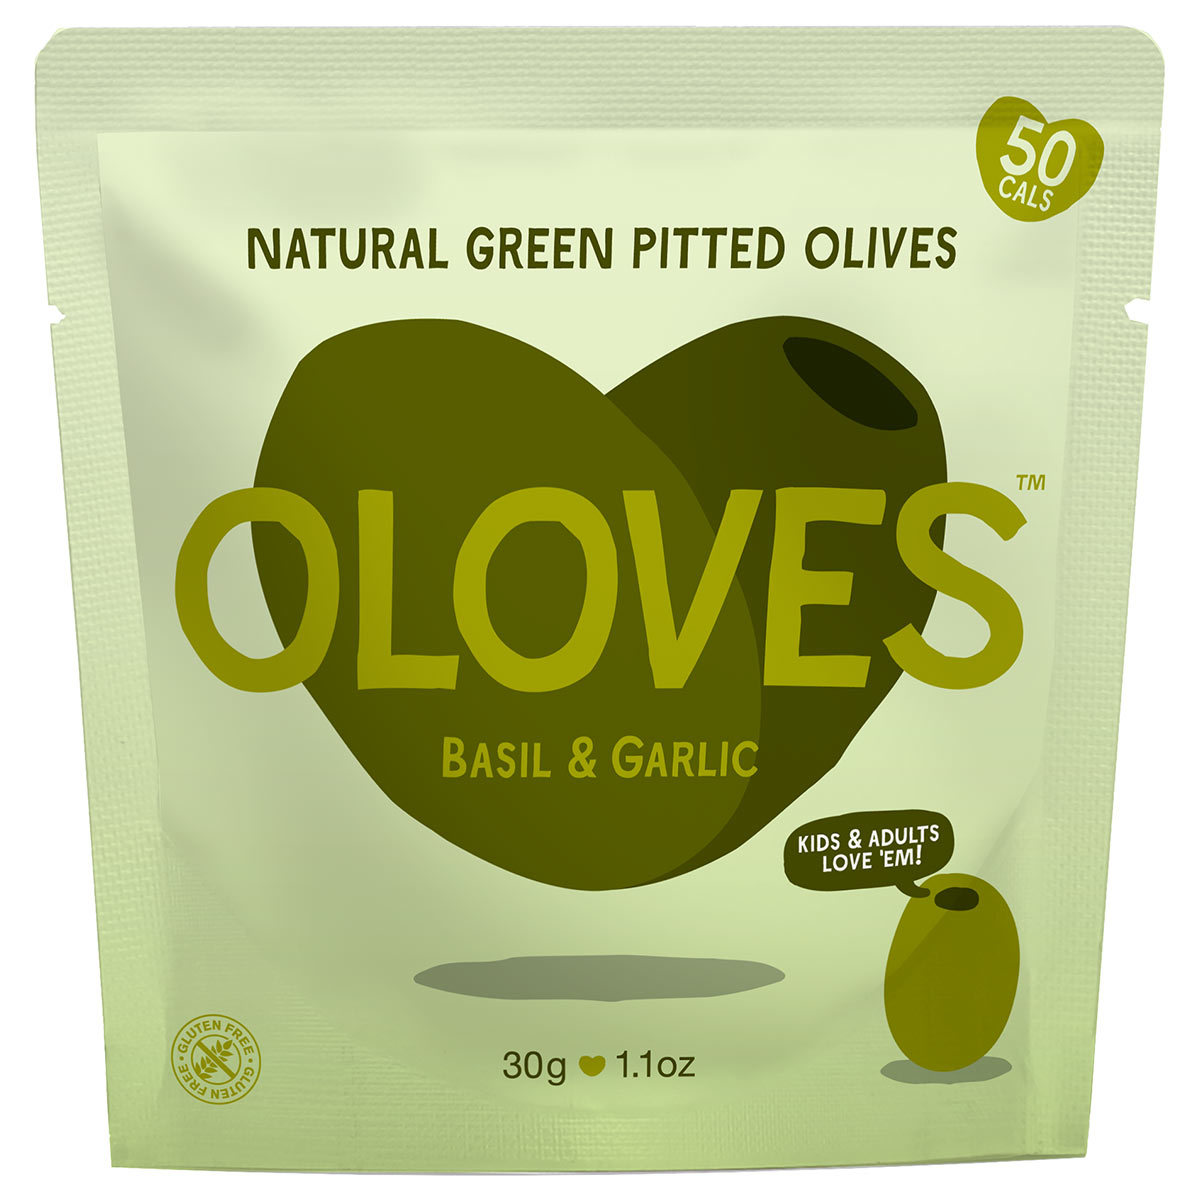 Oloves Basil & Garlic Natural Green Pitted Olives, 20 x 30g